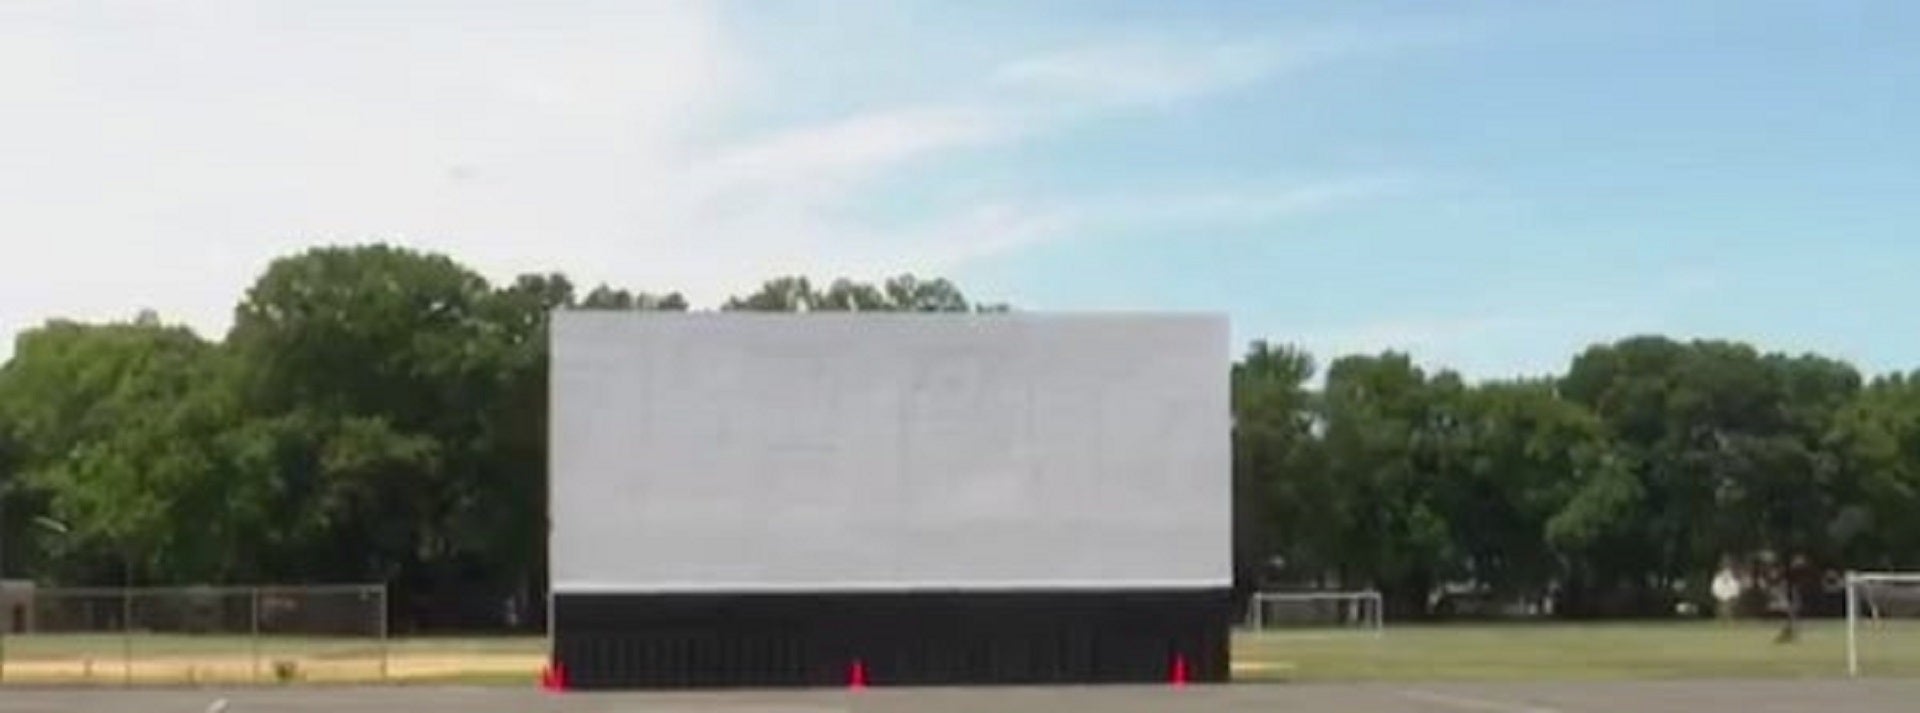 Cranford Theater Drive-in reopens; screens ‘Grease' as its first film